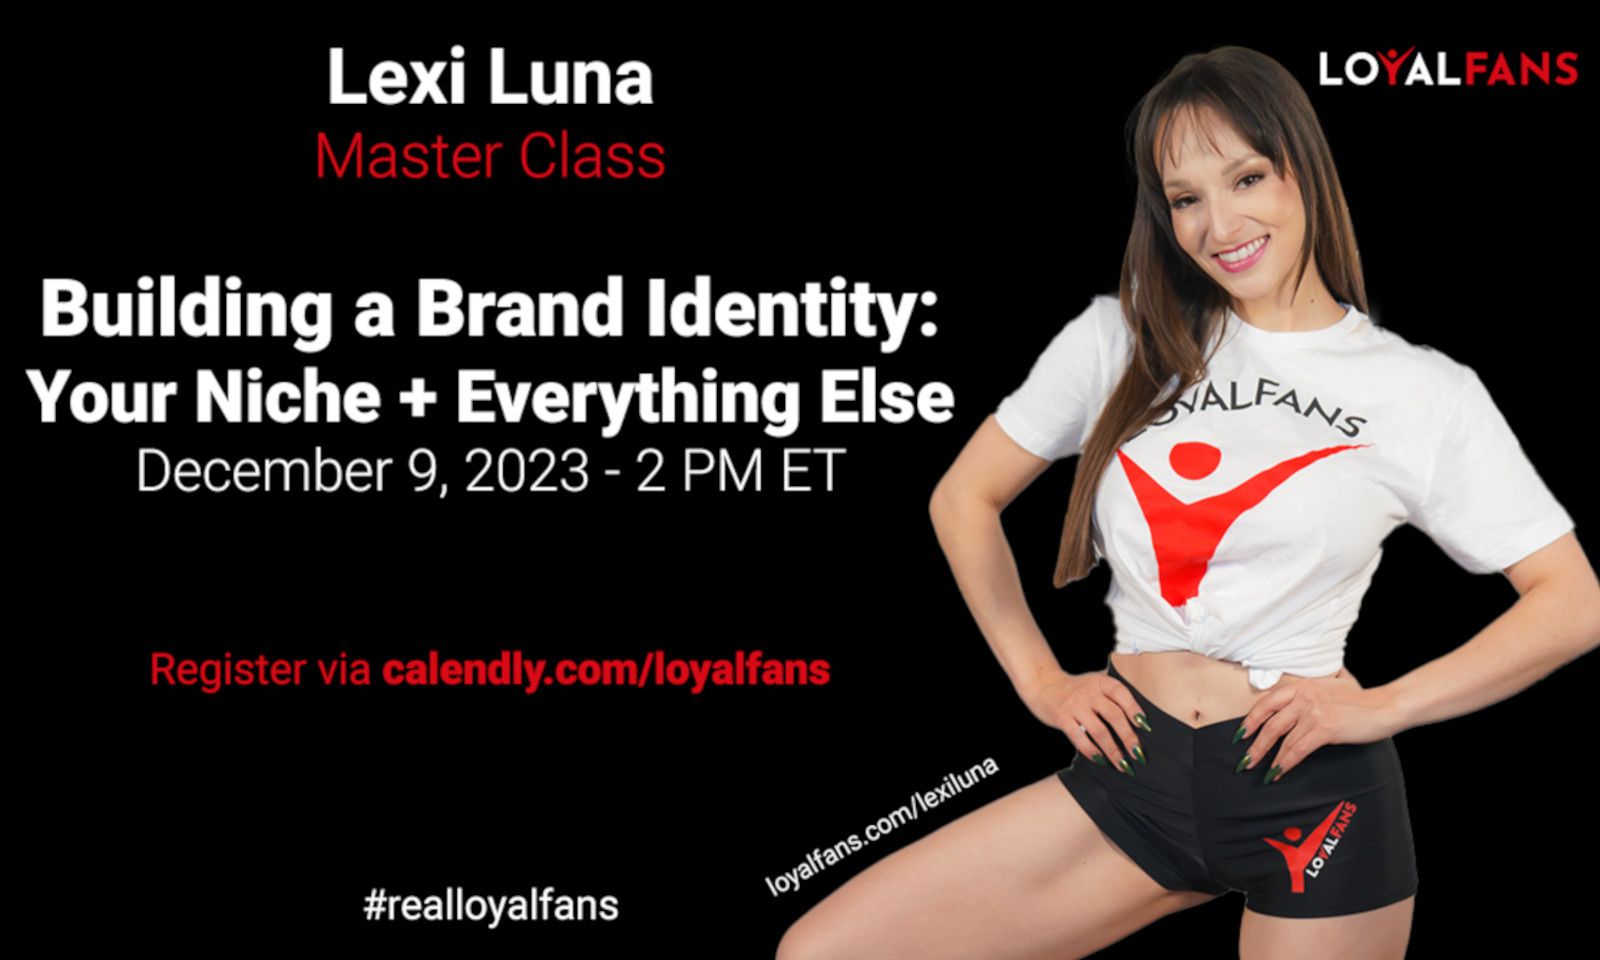 LoyalFans to Host Master Class on Brand Building With Lexi Luna